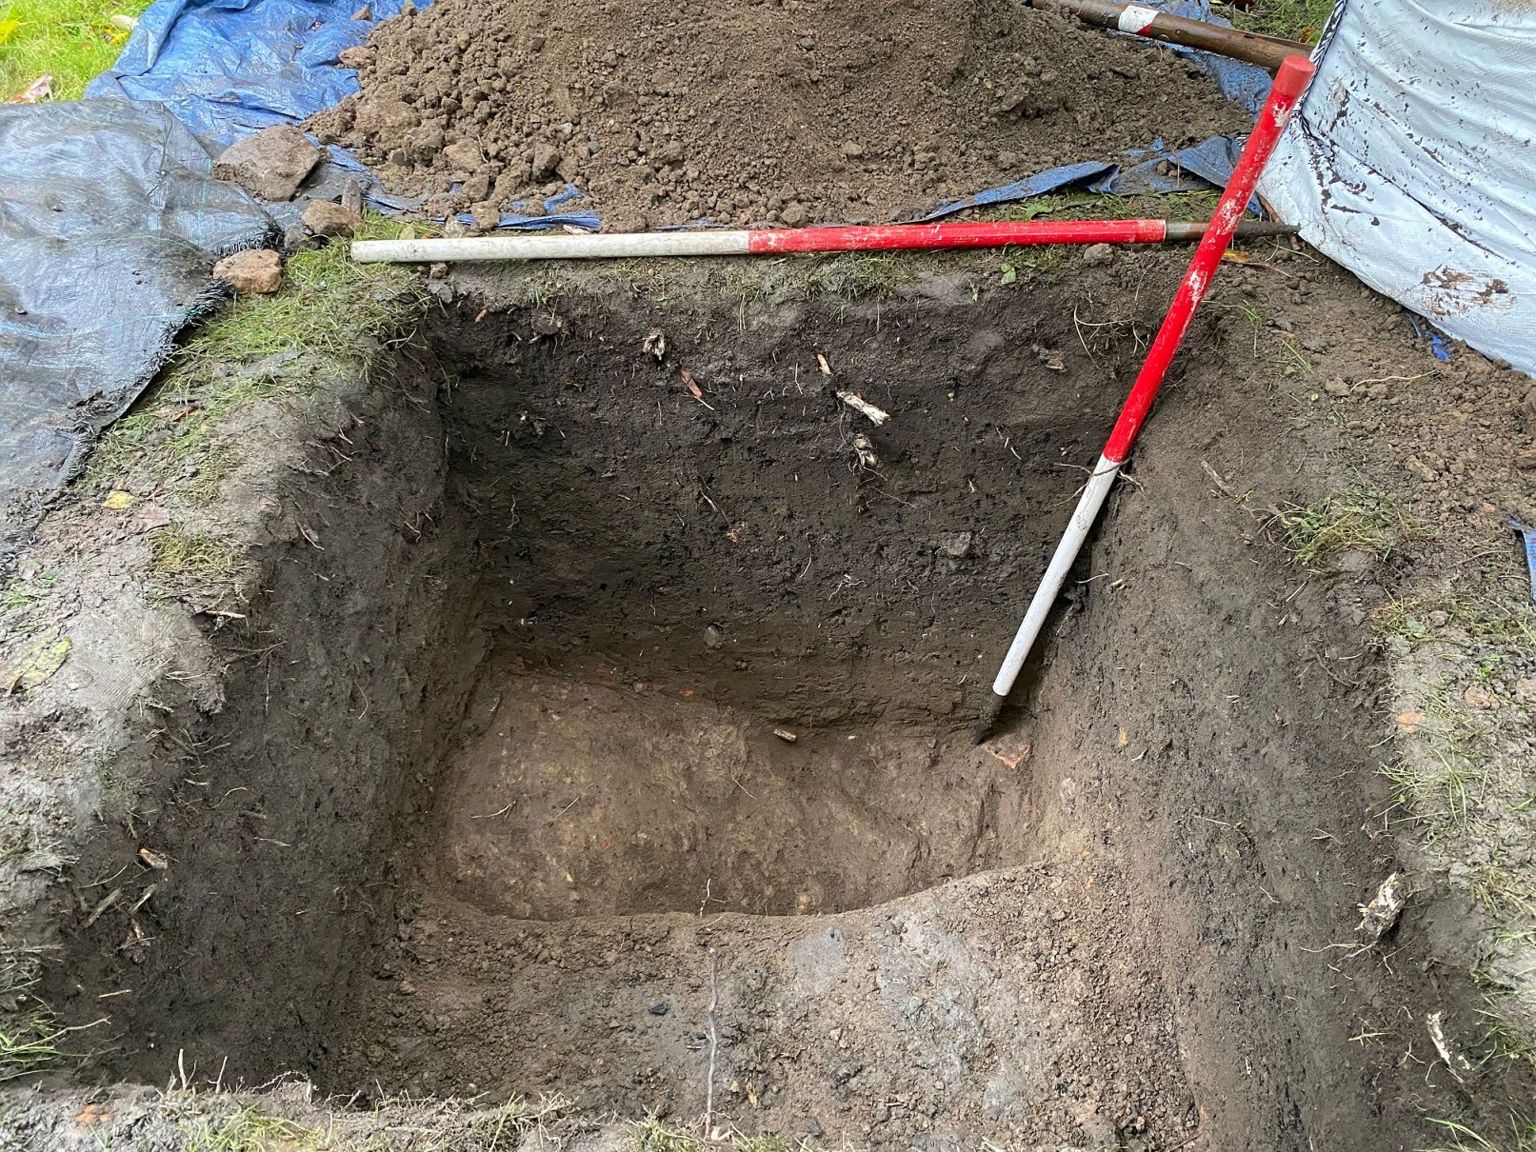 The dig took place in the garden of the Old Inn Cottage